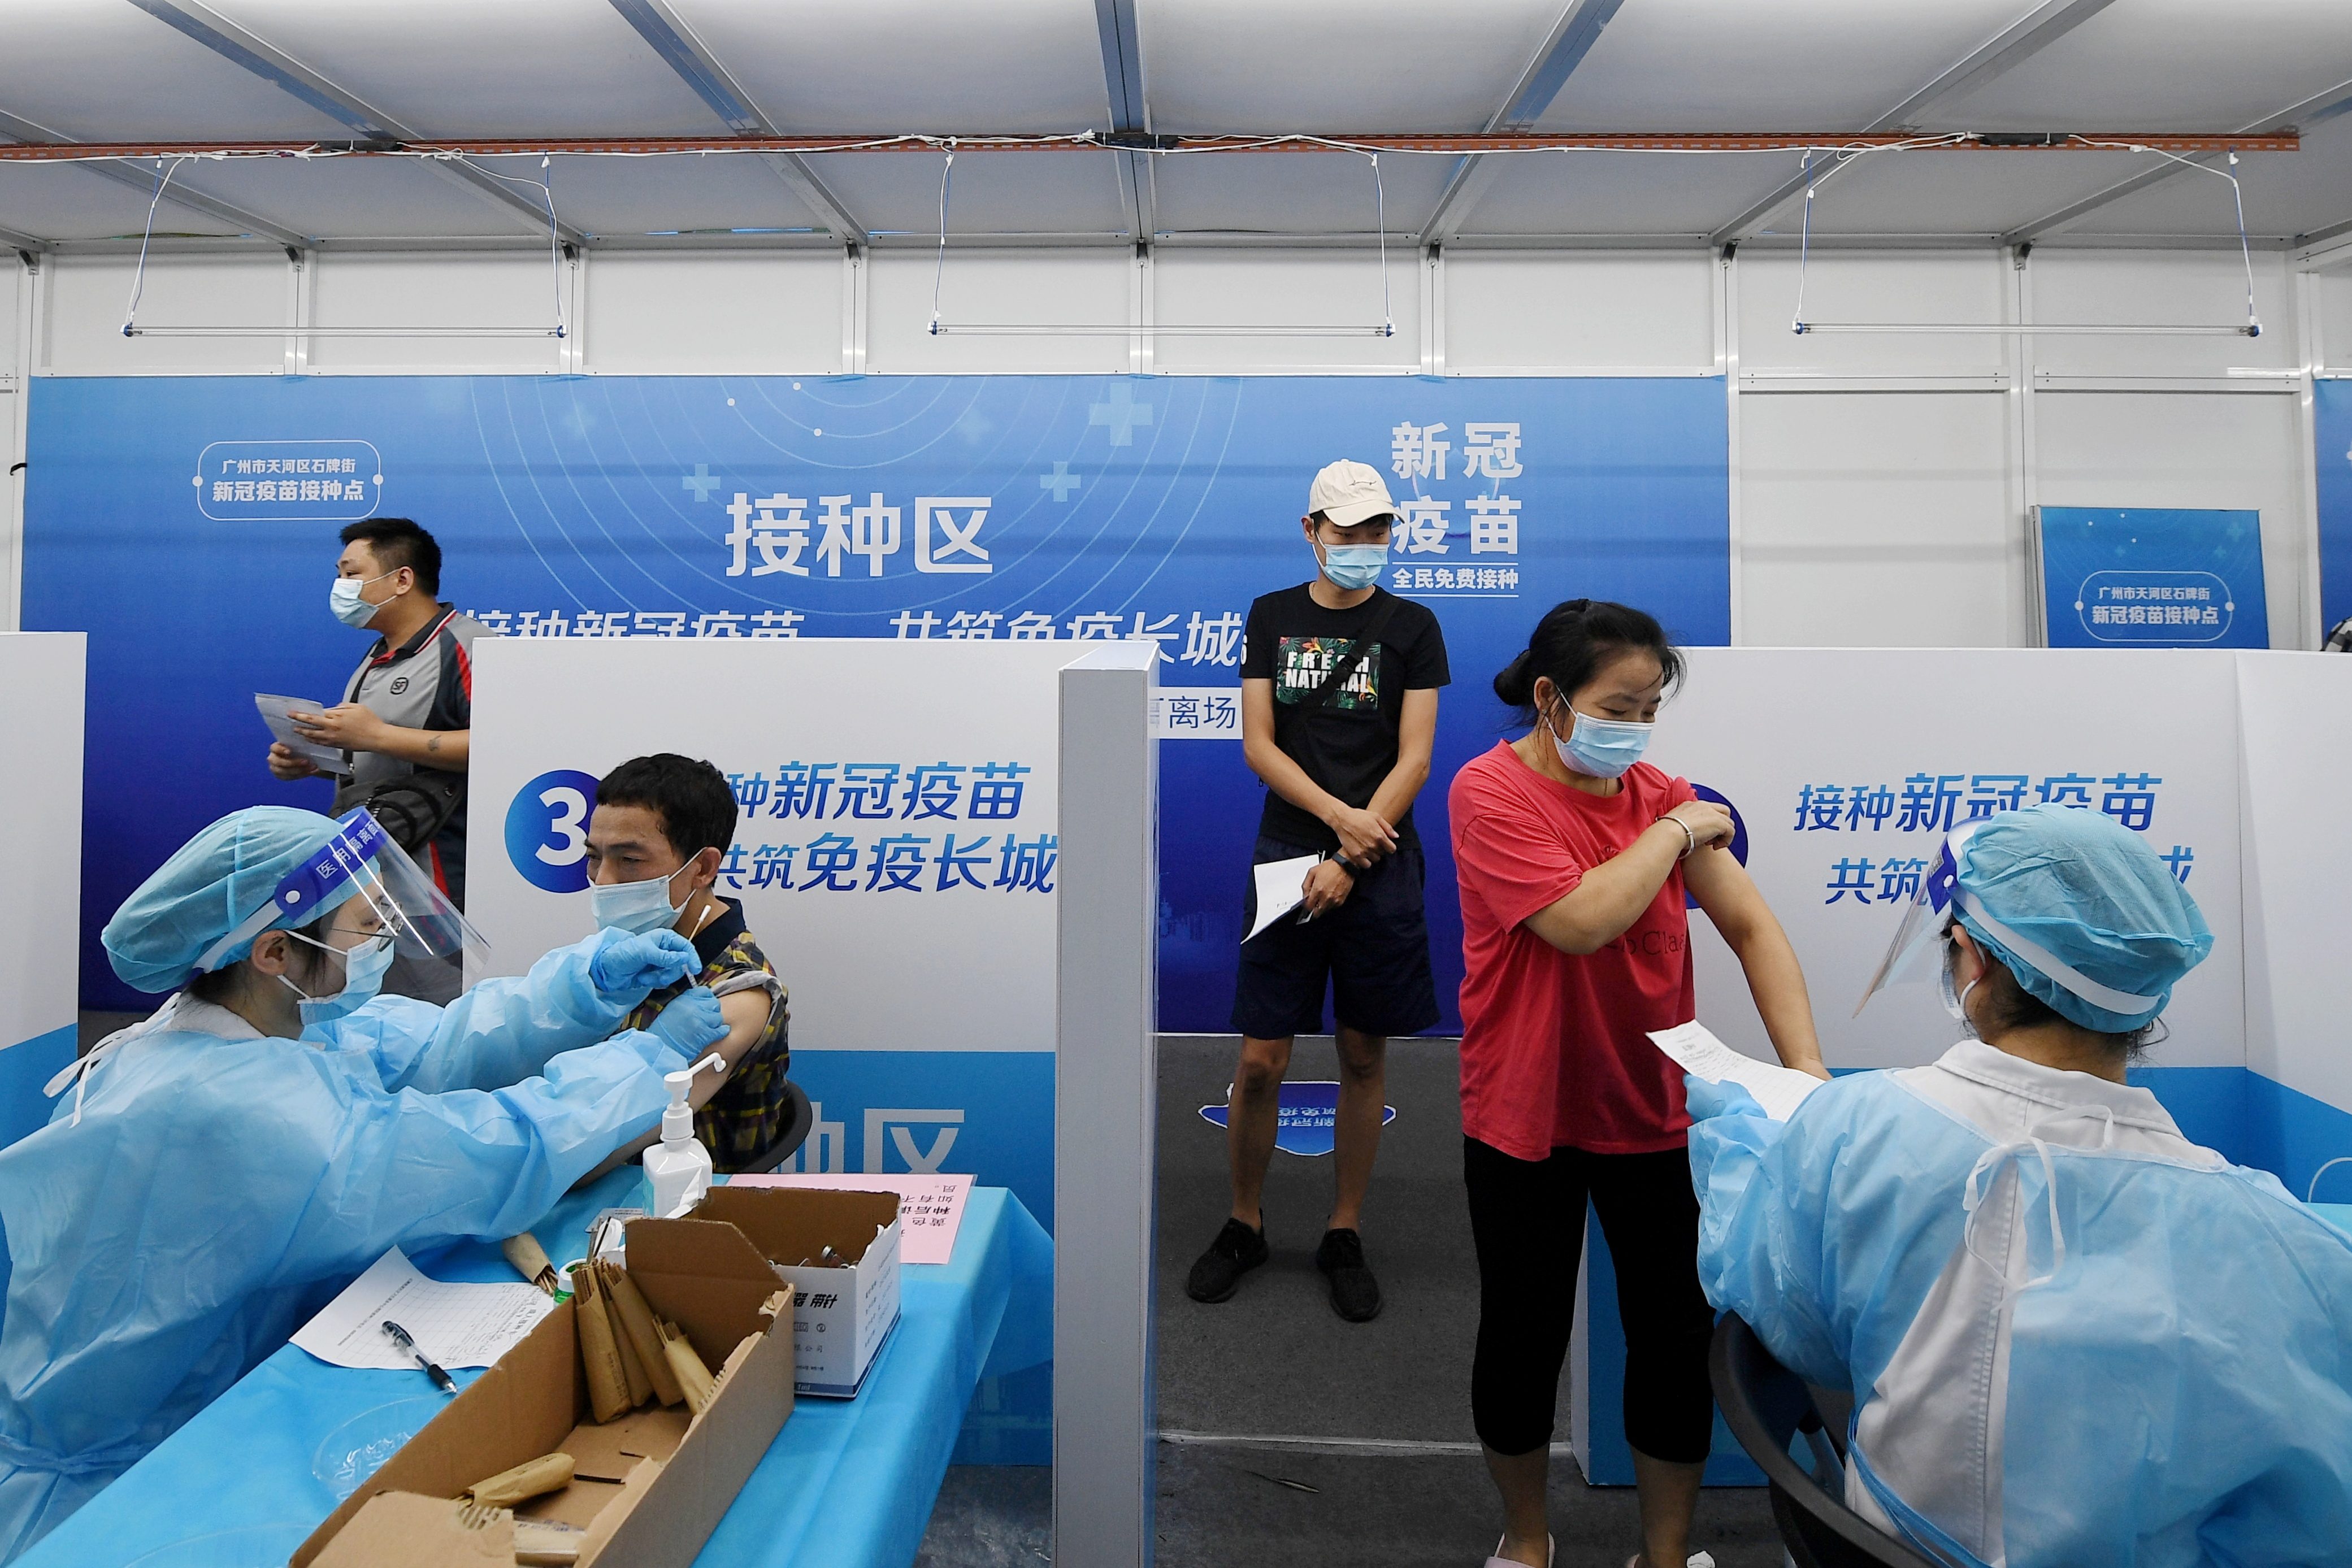 First COVID-19 case could have emerged in China in October 2019 – study